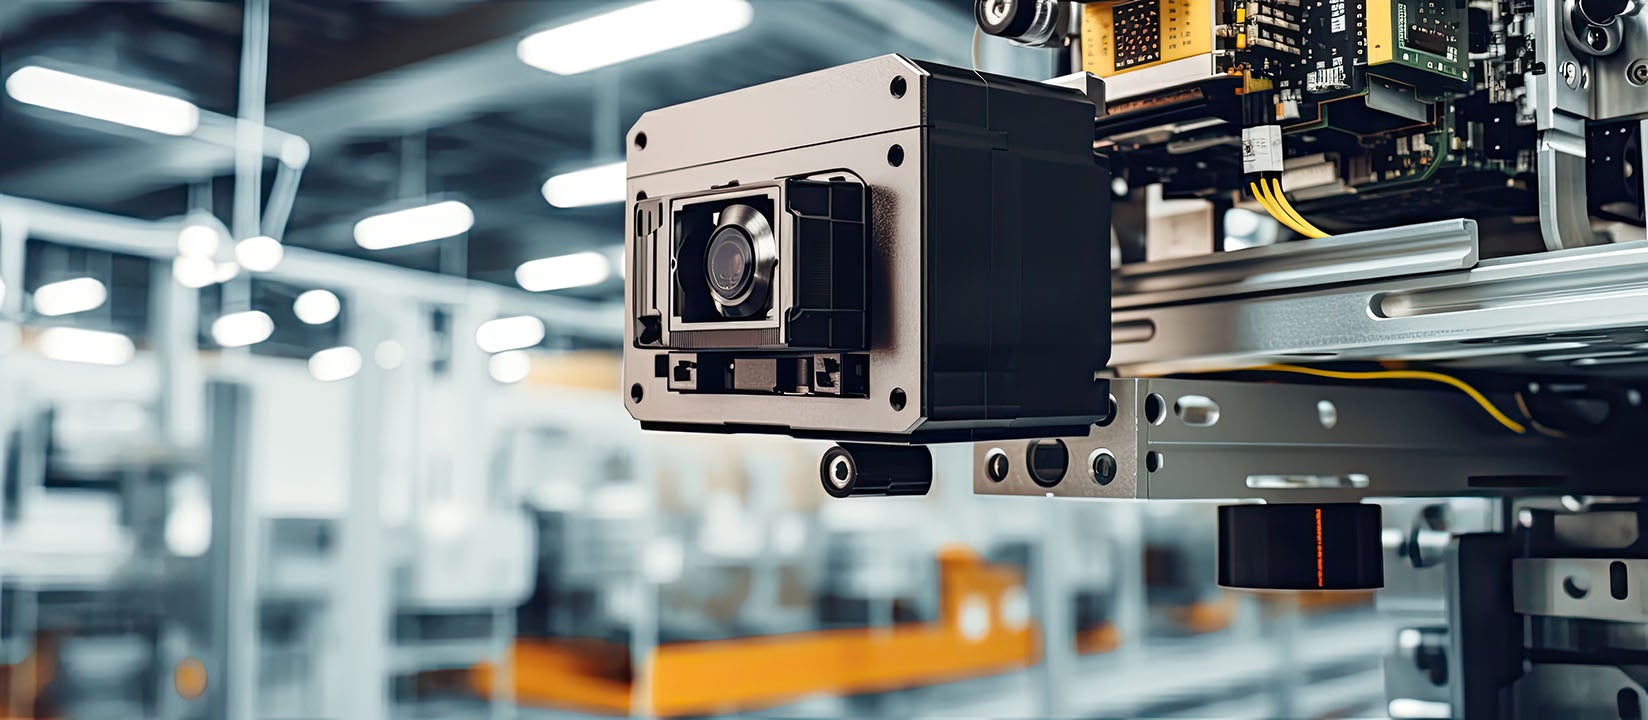 Choosing Image Sensors for Machine Vision Systems